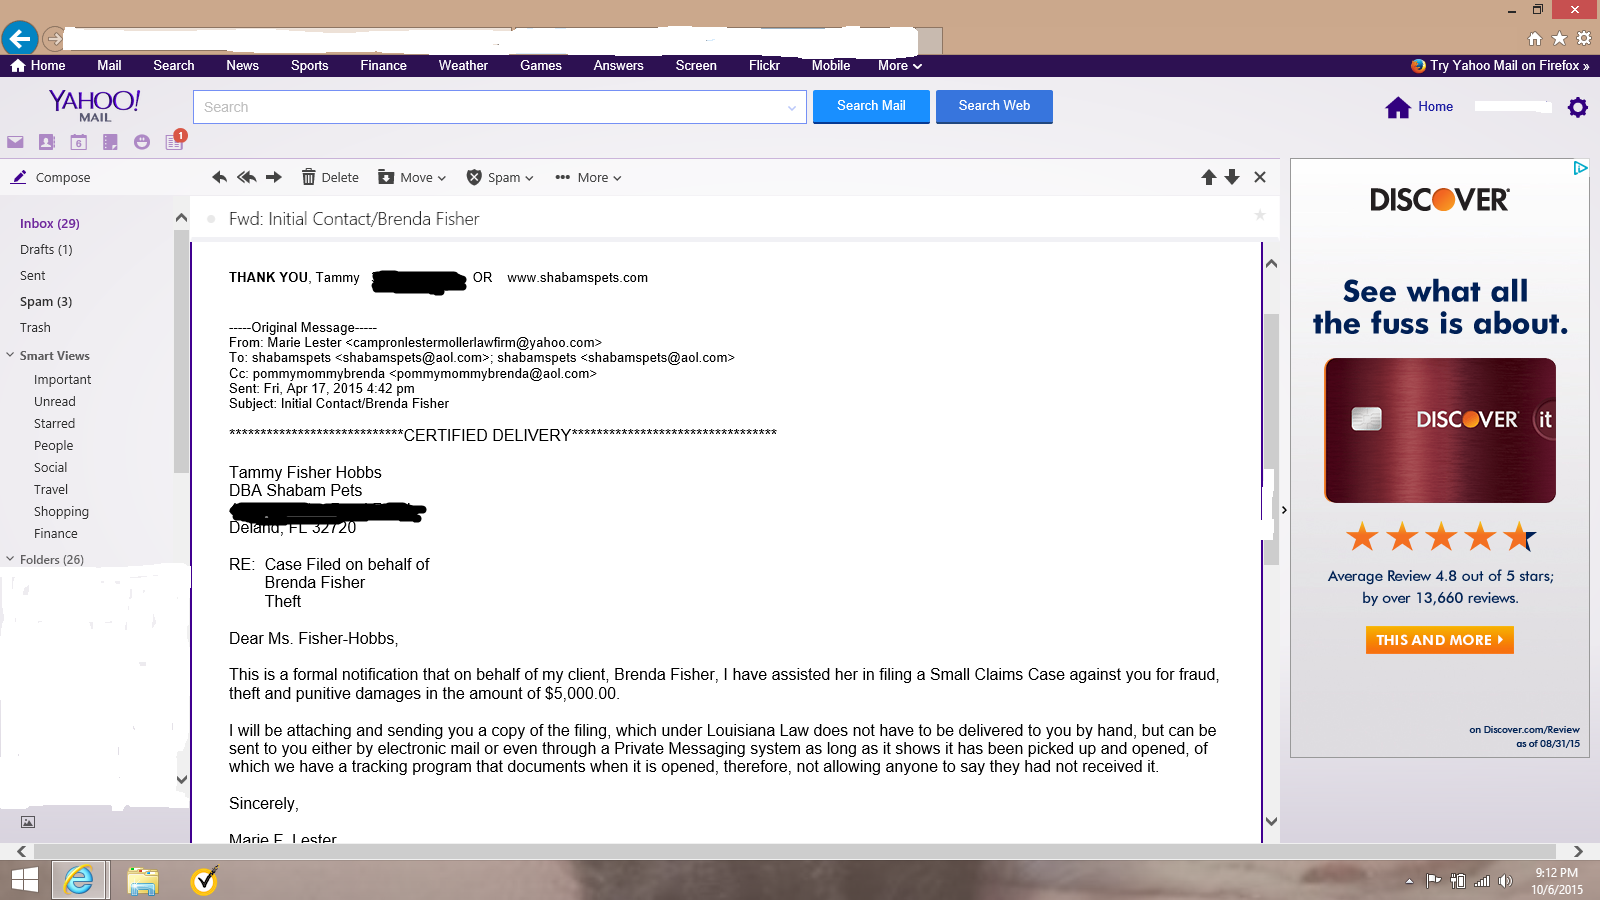 fake lawyer email sent by brenda fisher